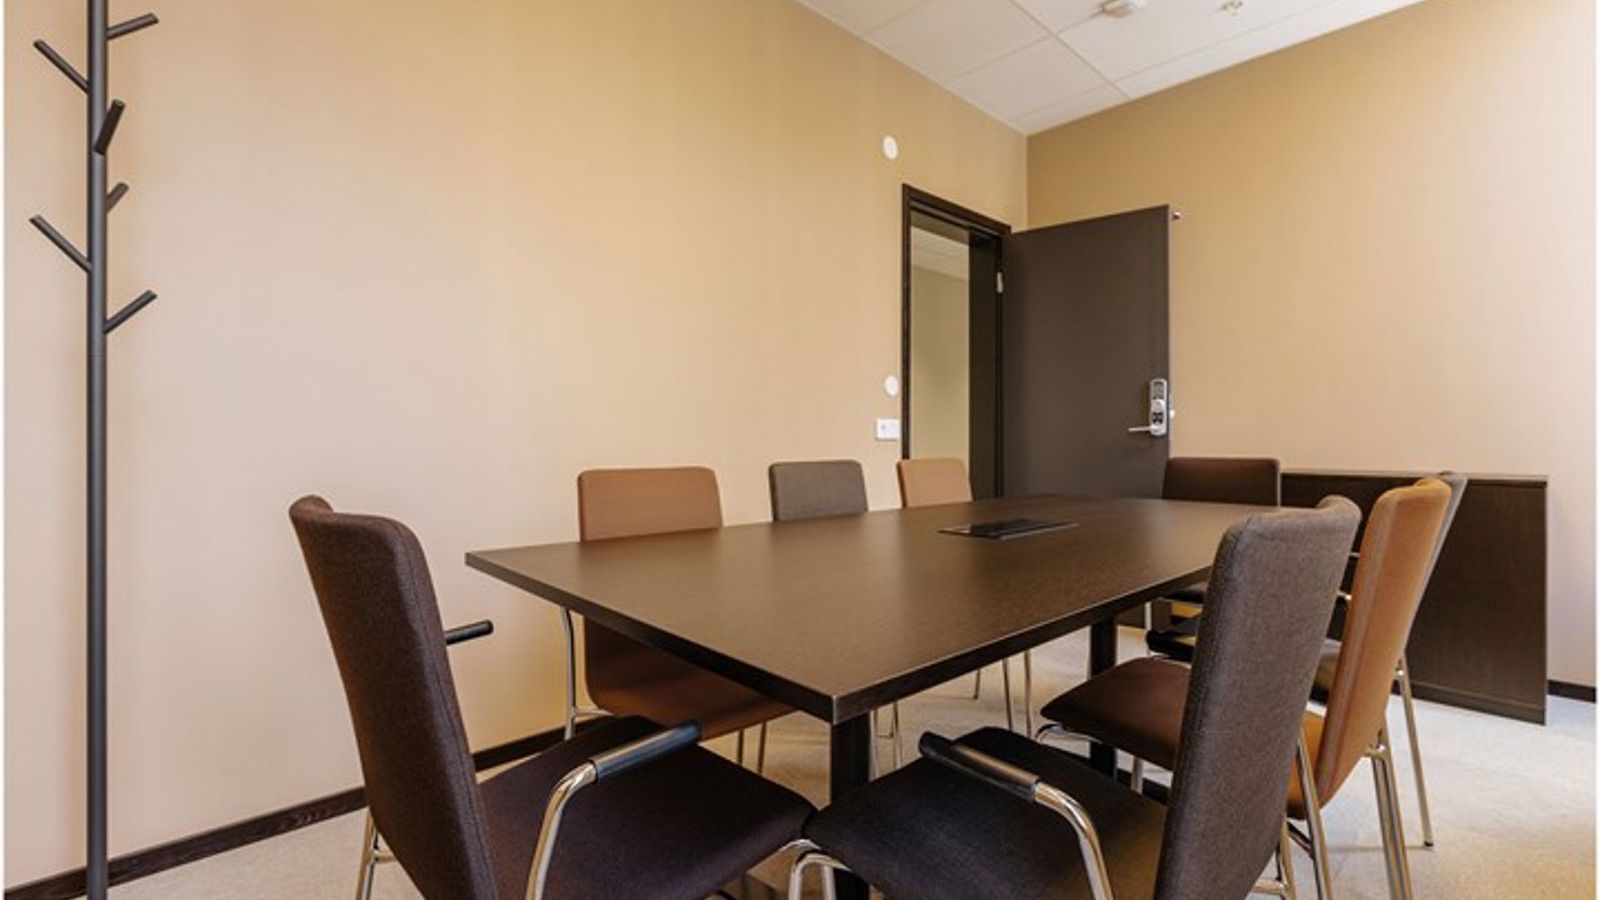 Conference room with board seating and brown colors